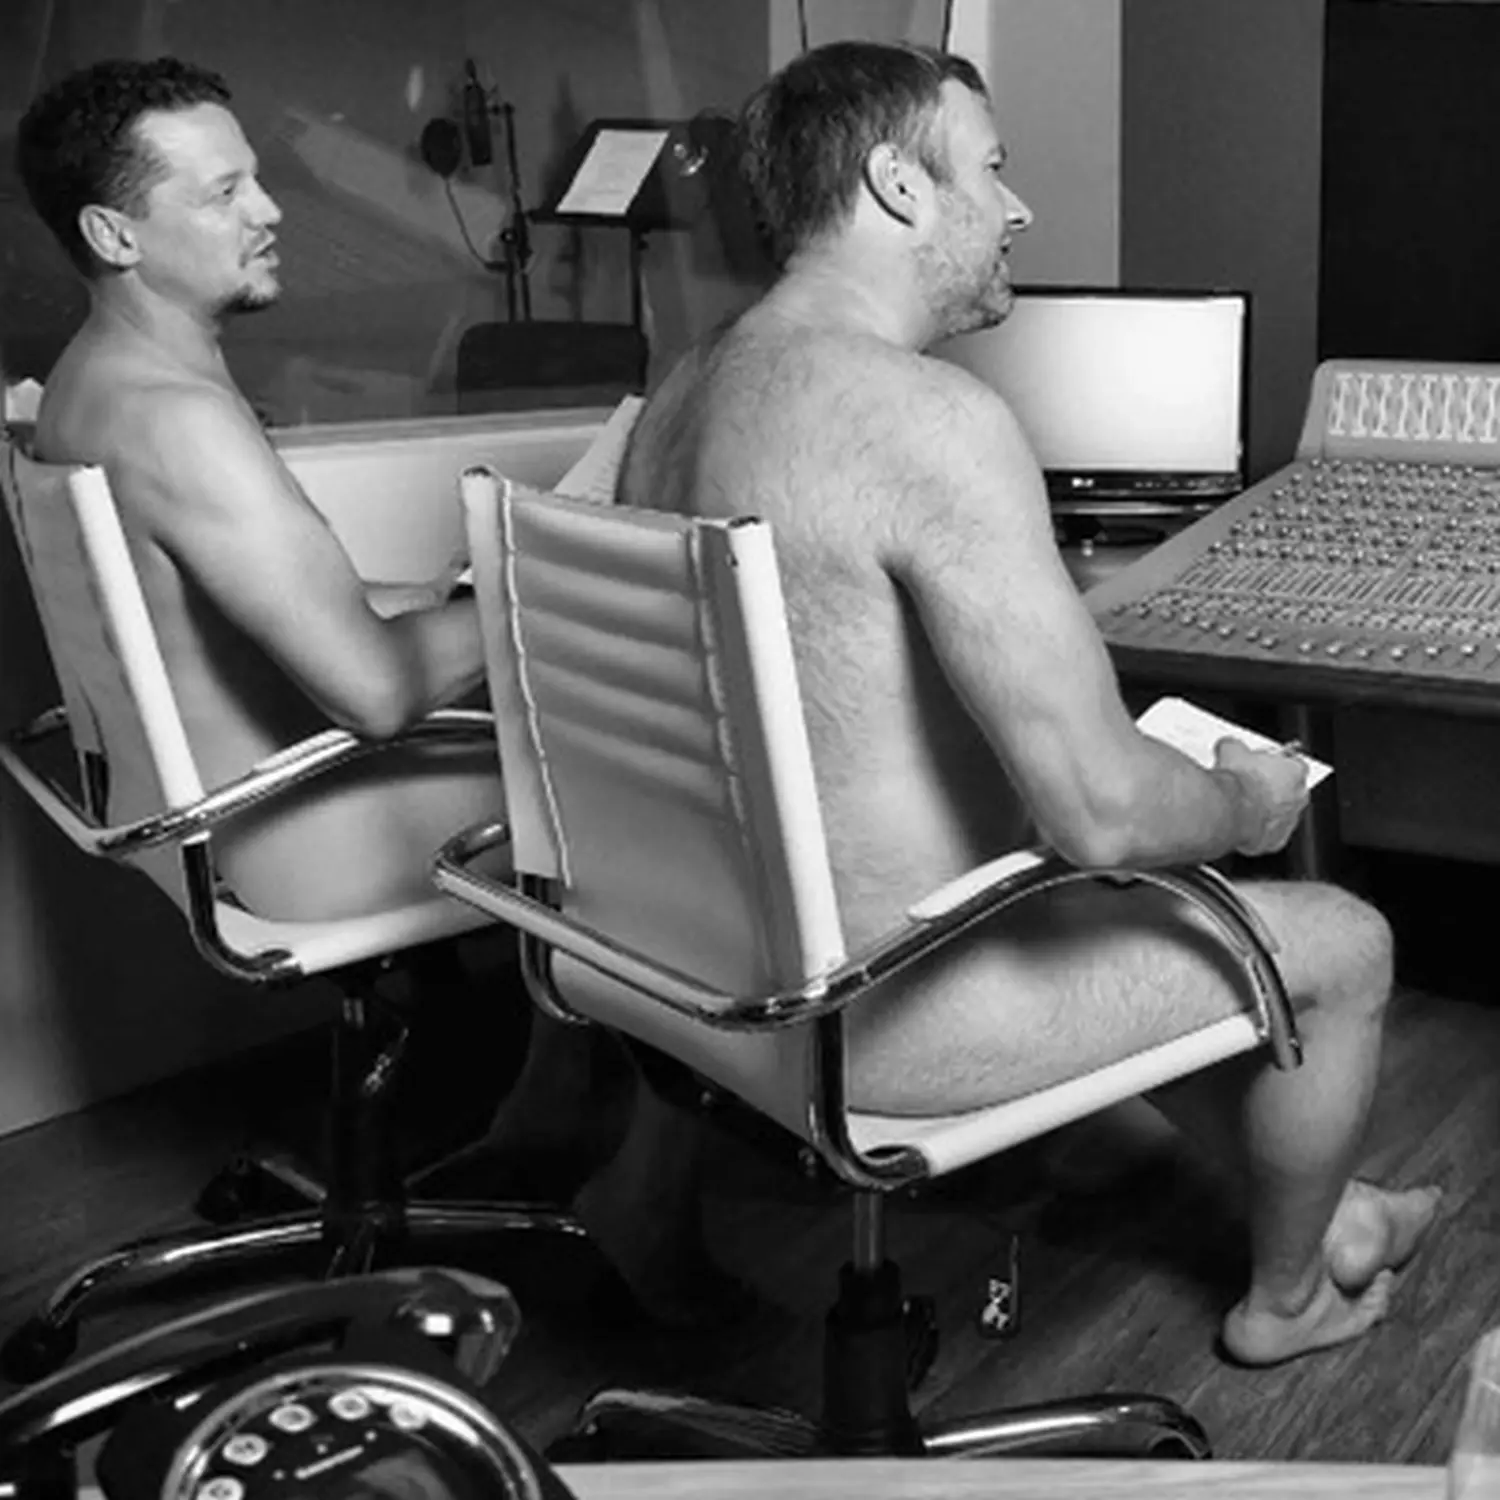 two naked mans sitting on a chair